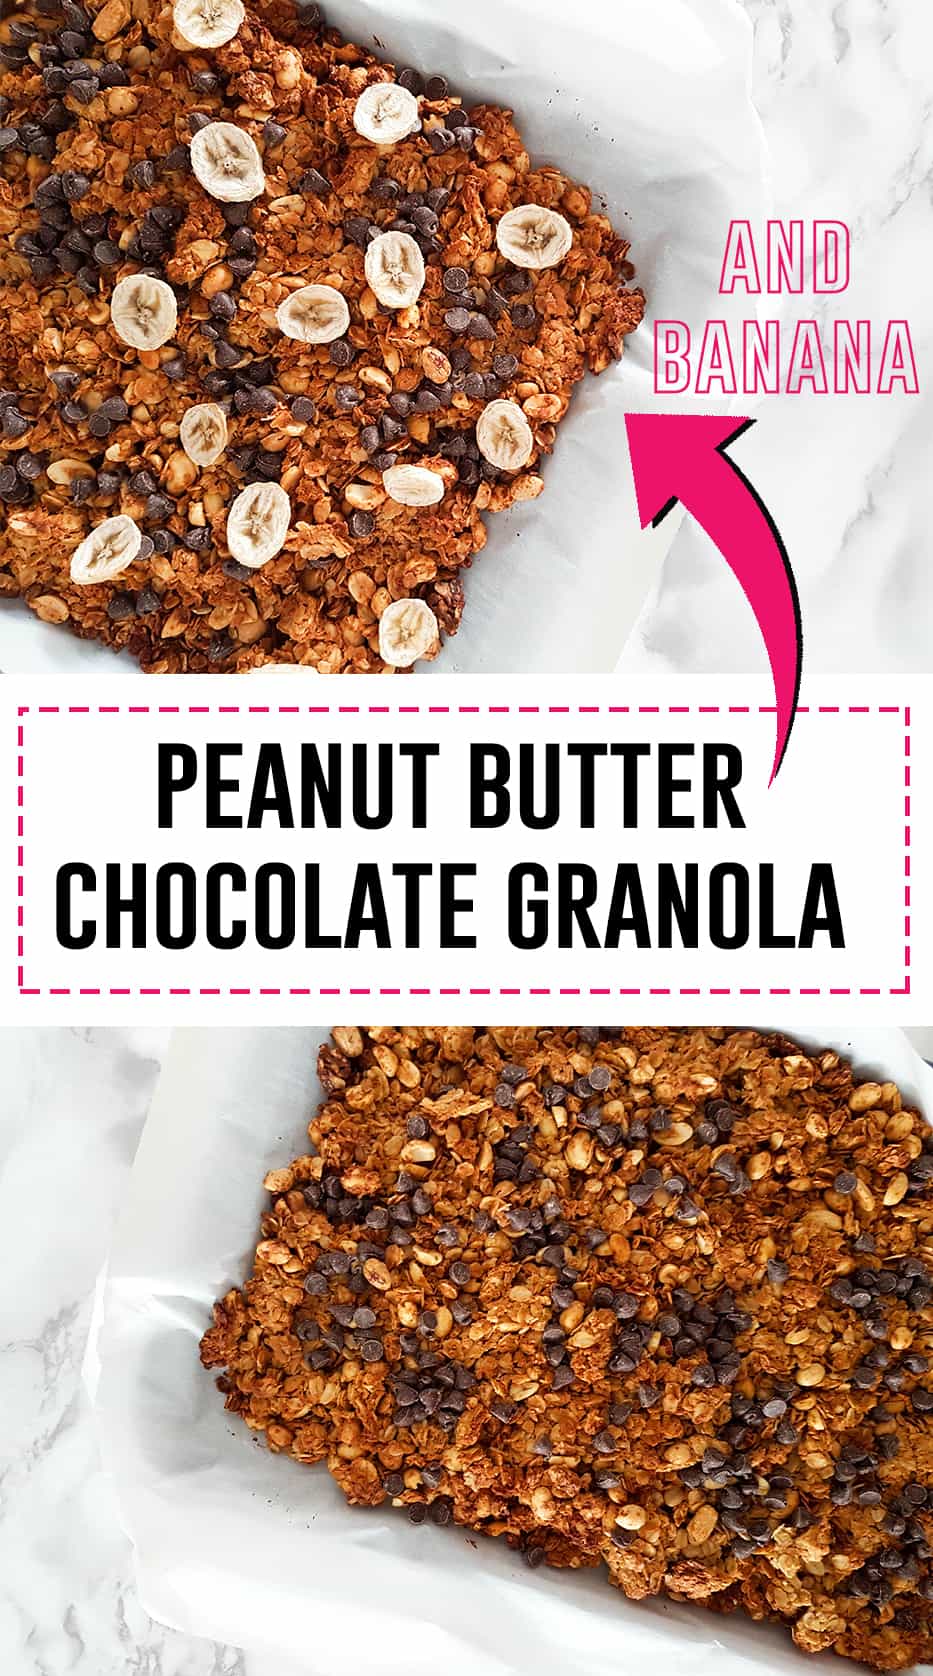 Peanut Butter Chocolate Granola -Do you love peanut butter? Do you love chocolate? Then this granola is perfect for you!